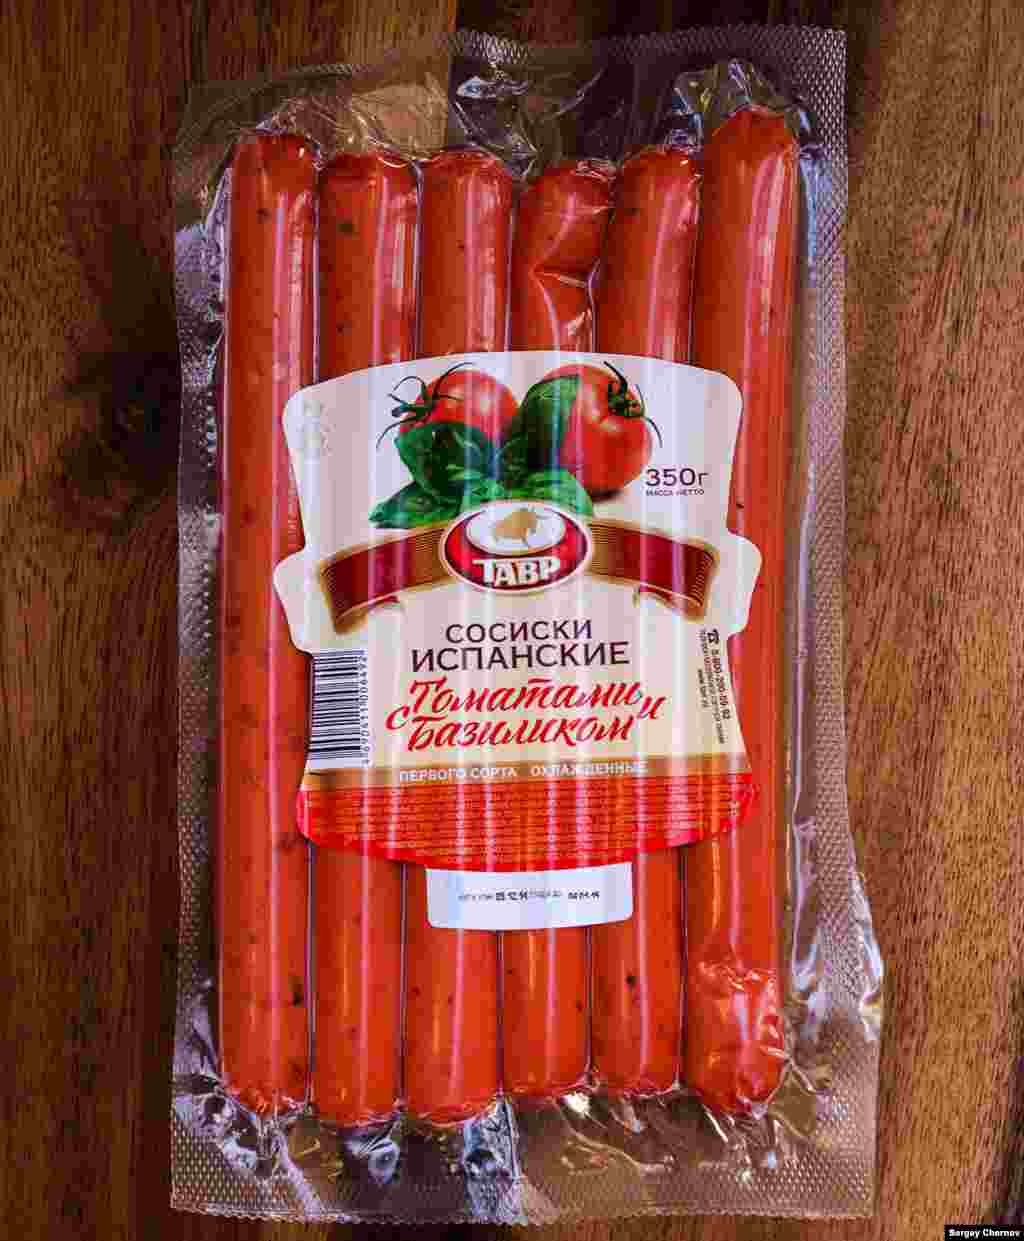 "Spanish" sausages. Made in Rostov-on-Don.